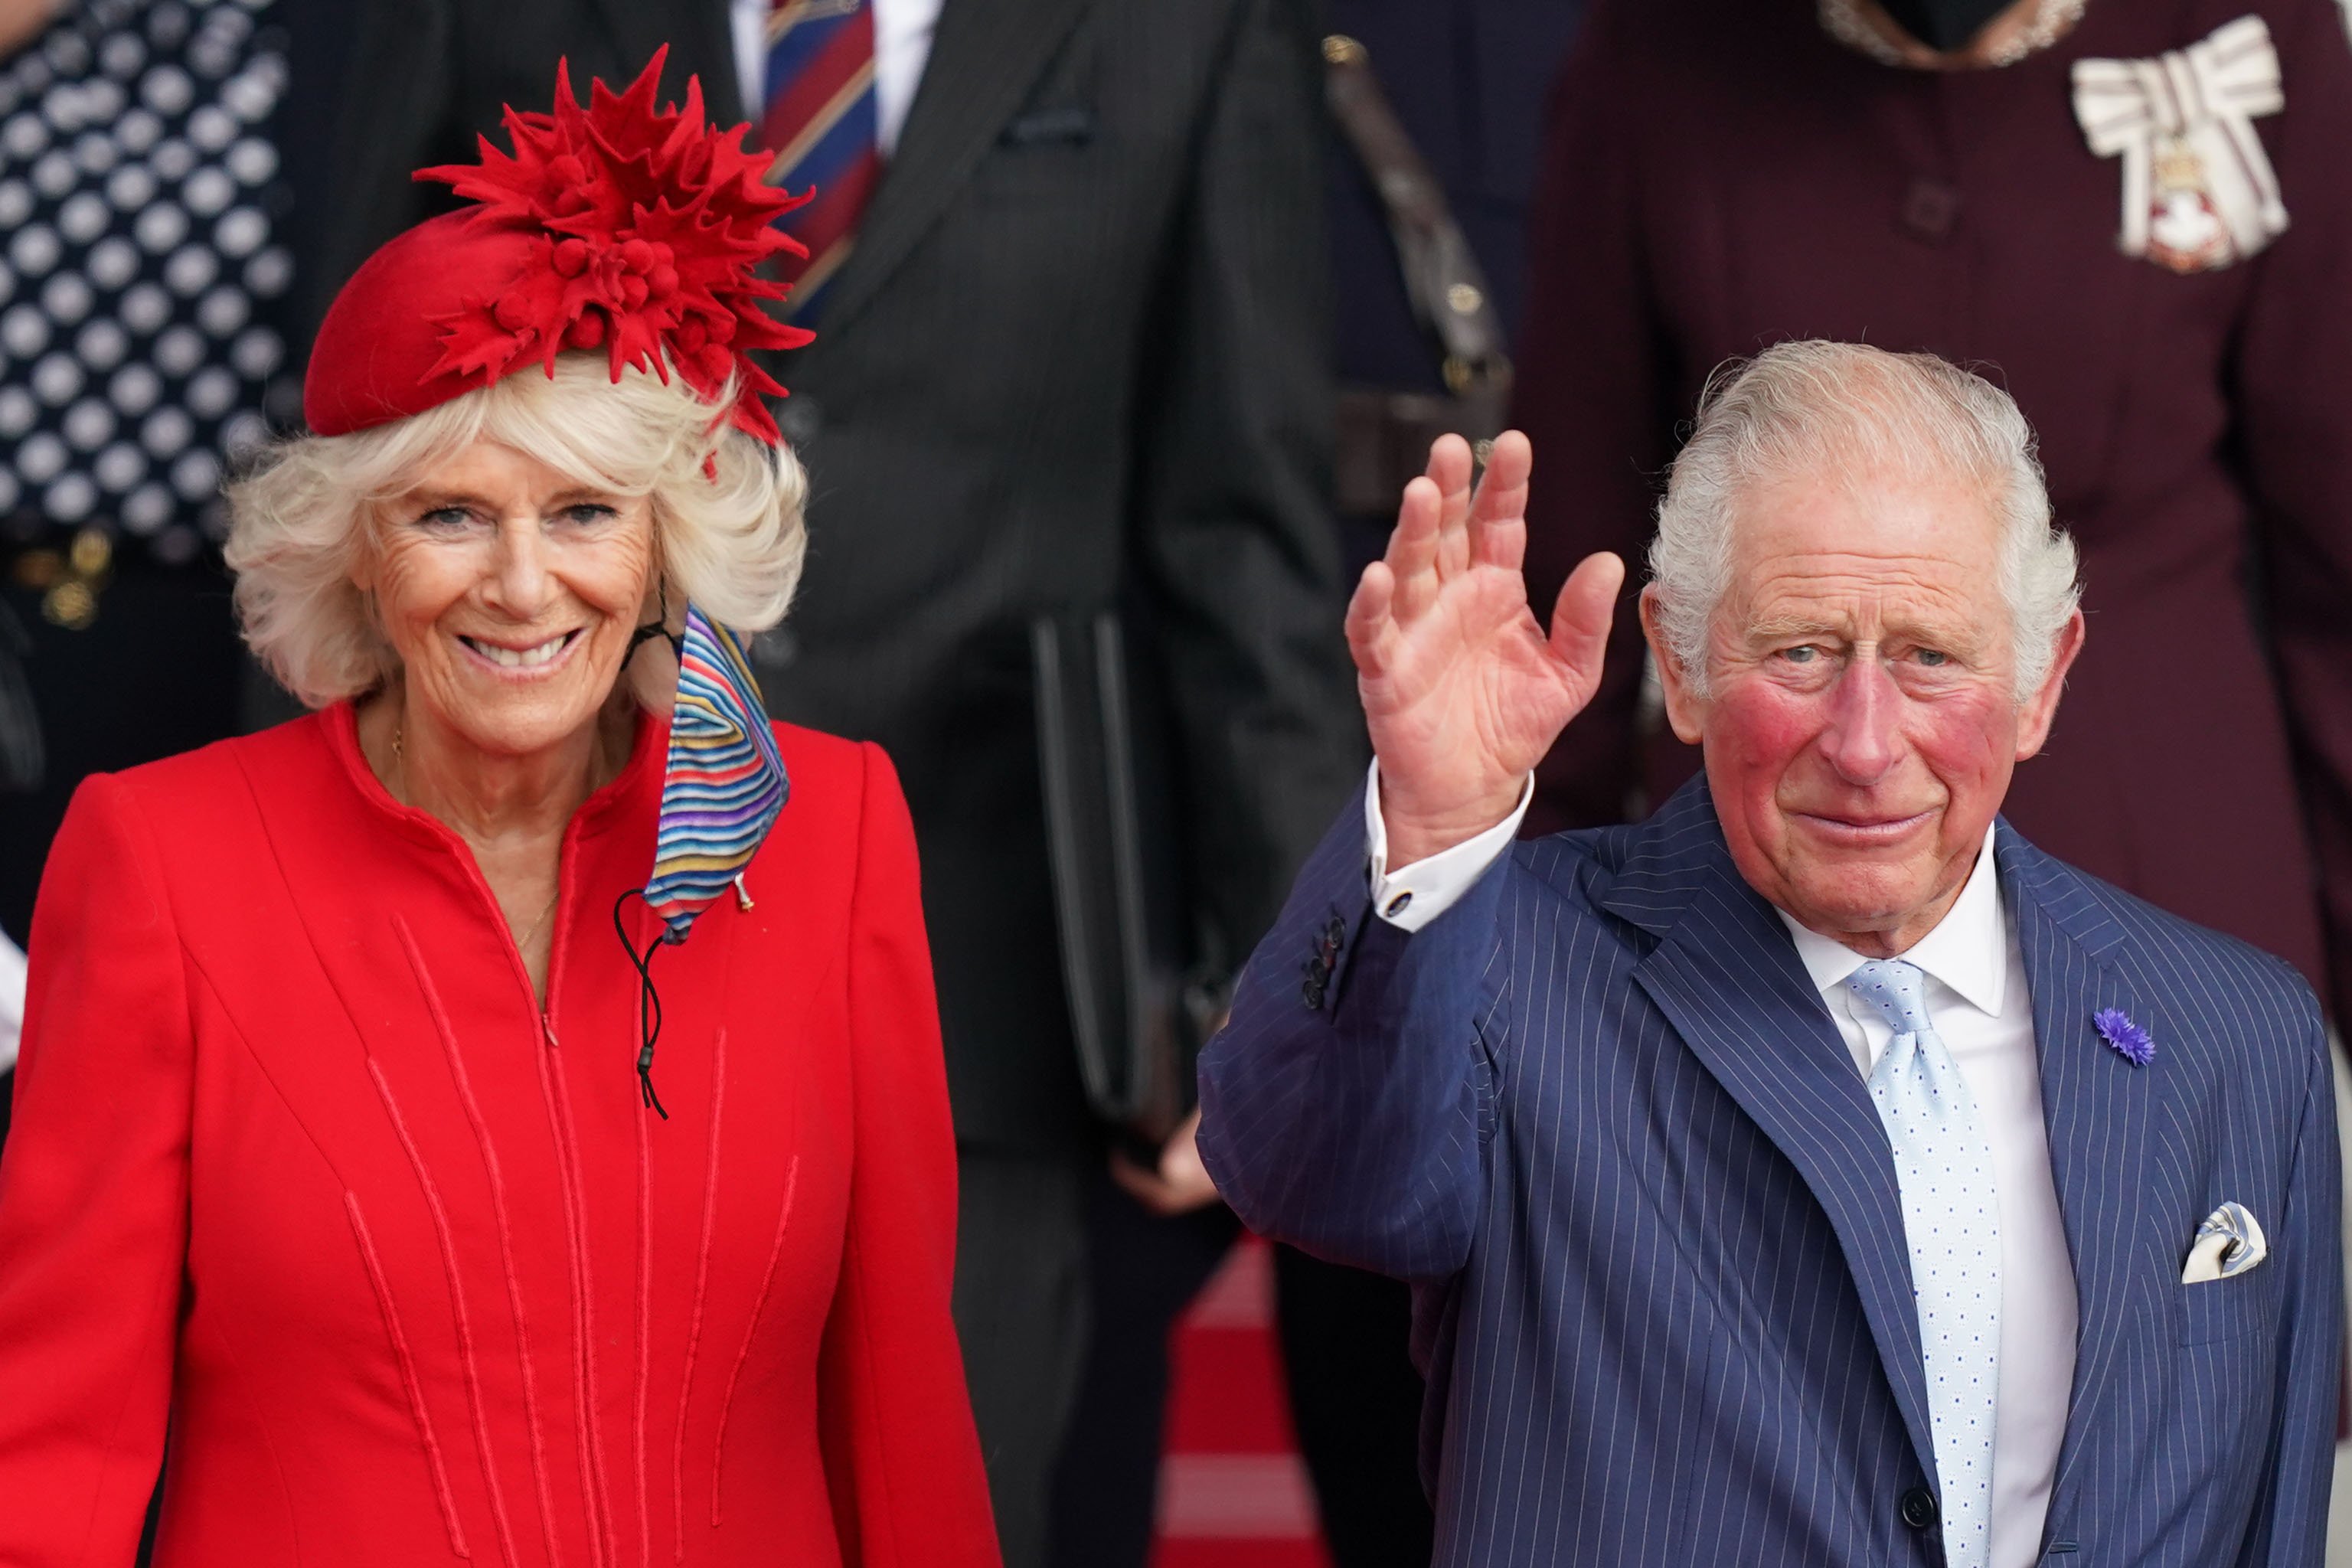 Prince Charles, Prince of Wales and Camilla, Duchess of Cornwall leave after attending the opening ceremony of the sixth session of the Senedd at The Senedd on October 14, 2021. | Source: Getty Images